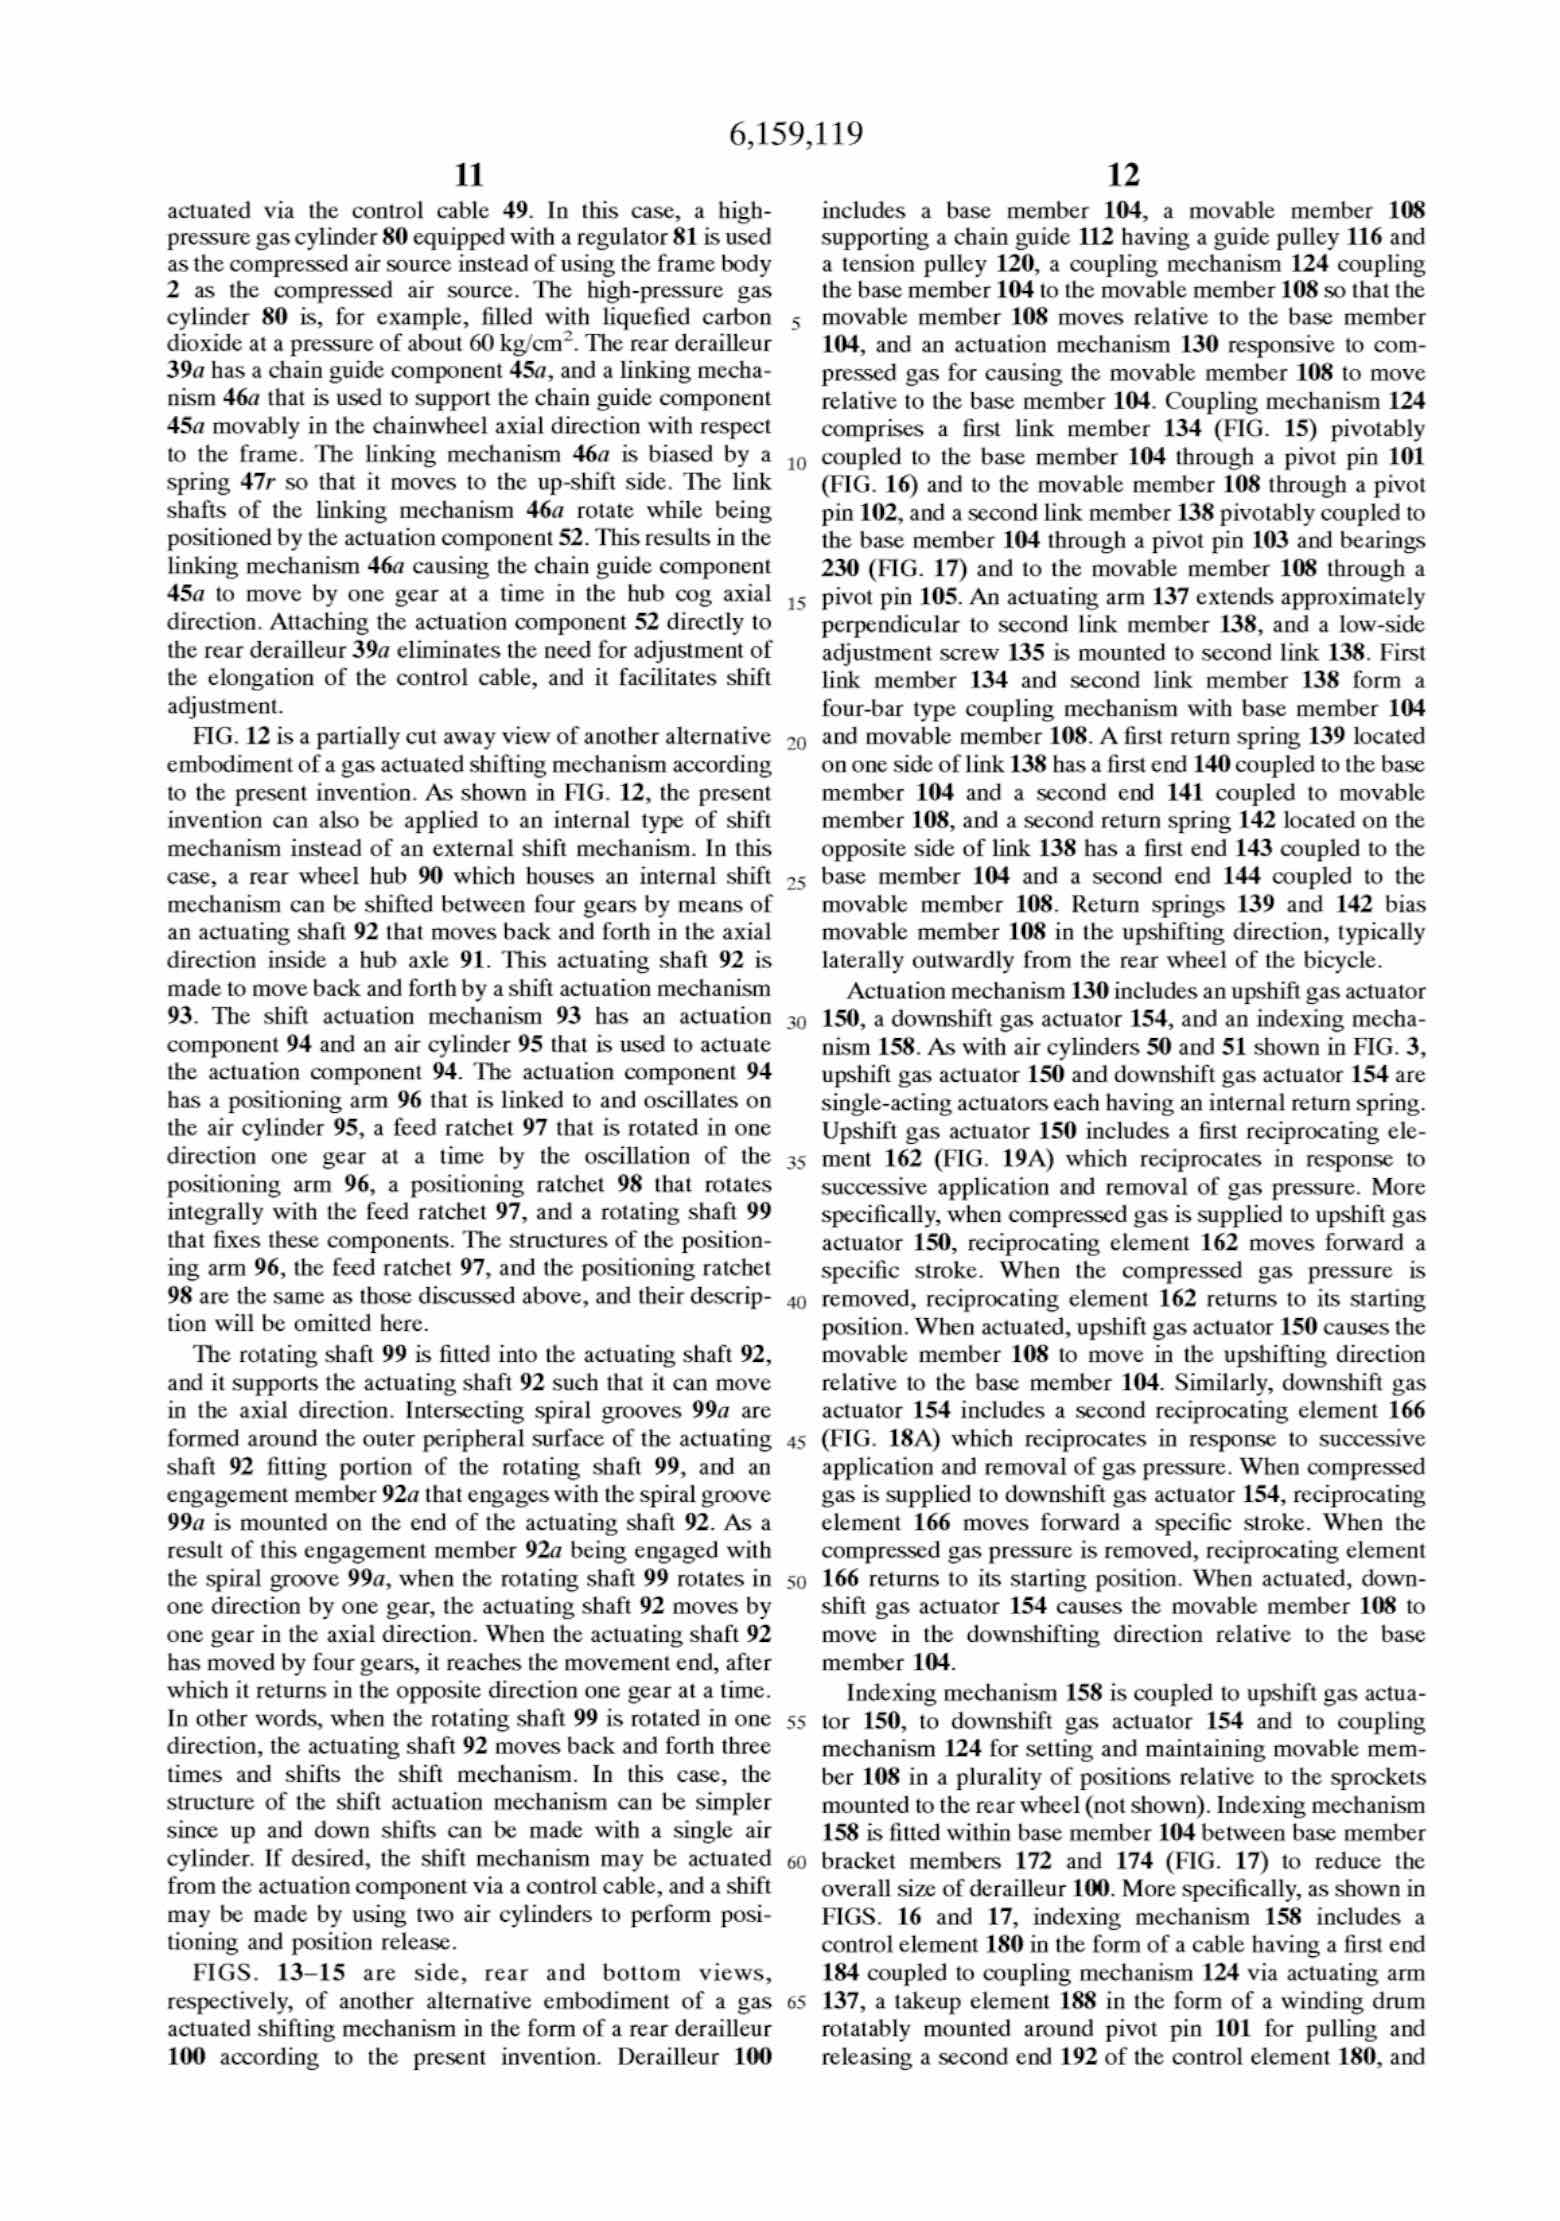 US Patent 6,159,119 - Shimano AirLines scan 24 main image